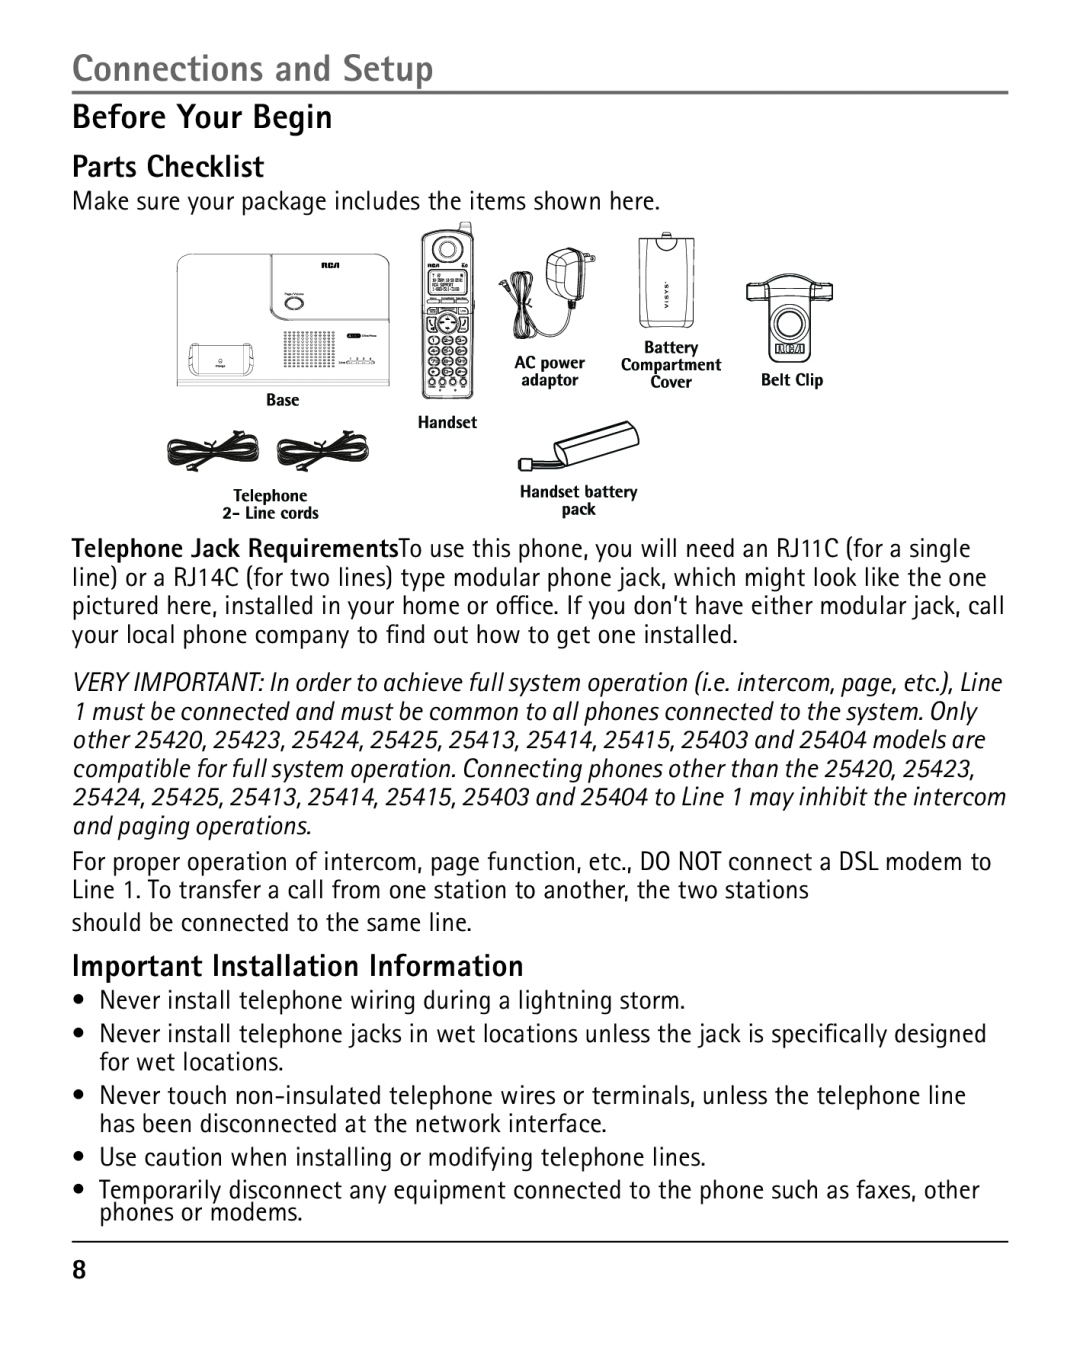 RCA 25420 manual Connections and Setup, Before Your Begin, Parts Checklist, Important Installation Information 